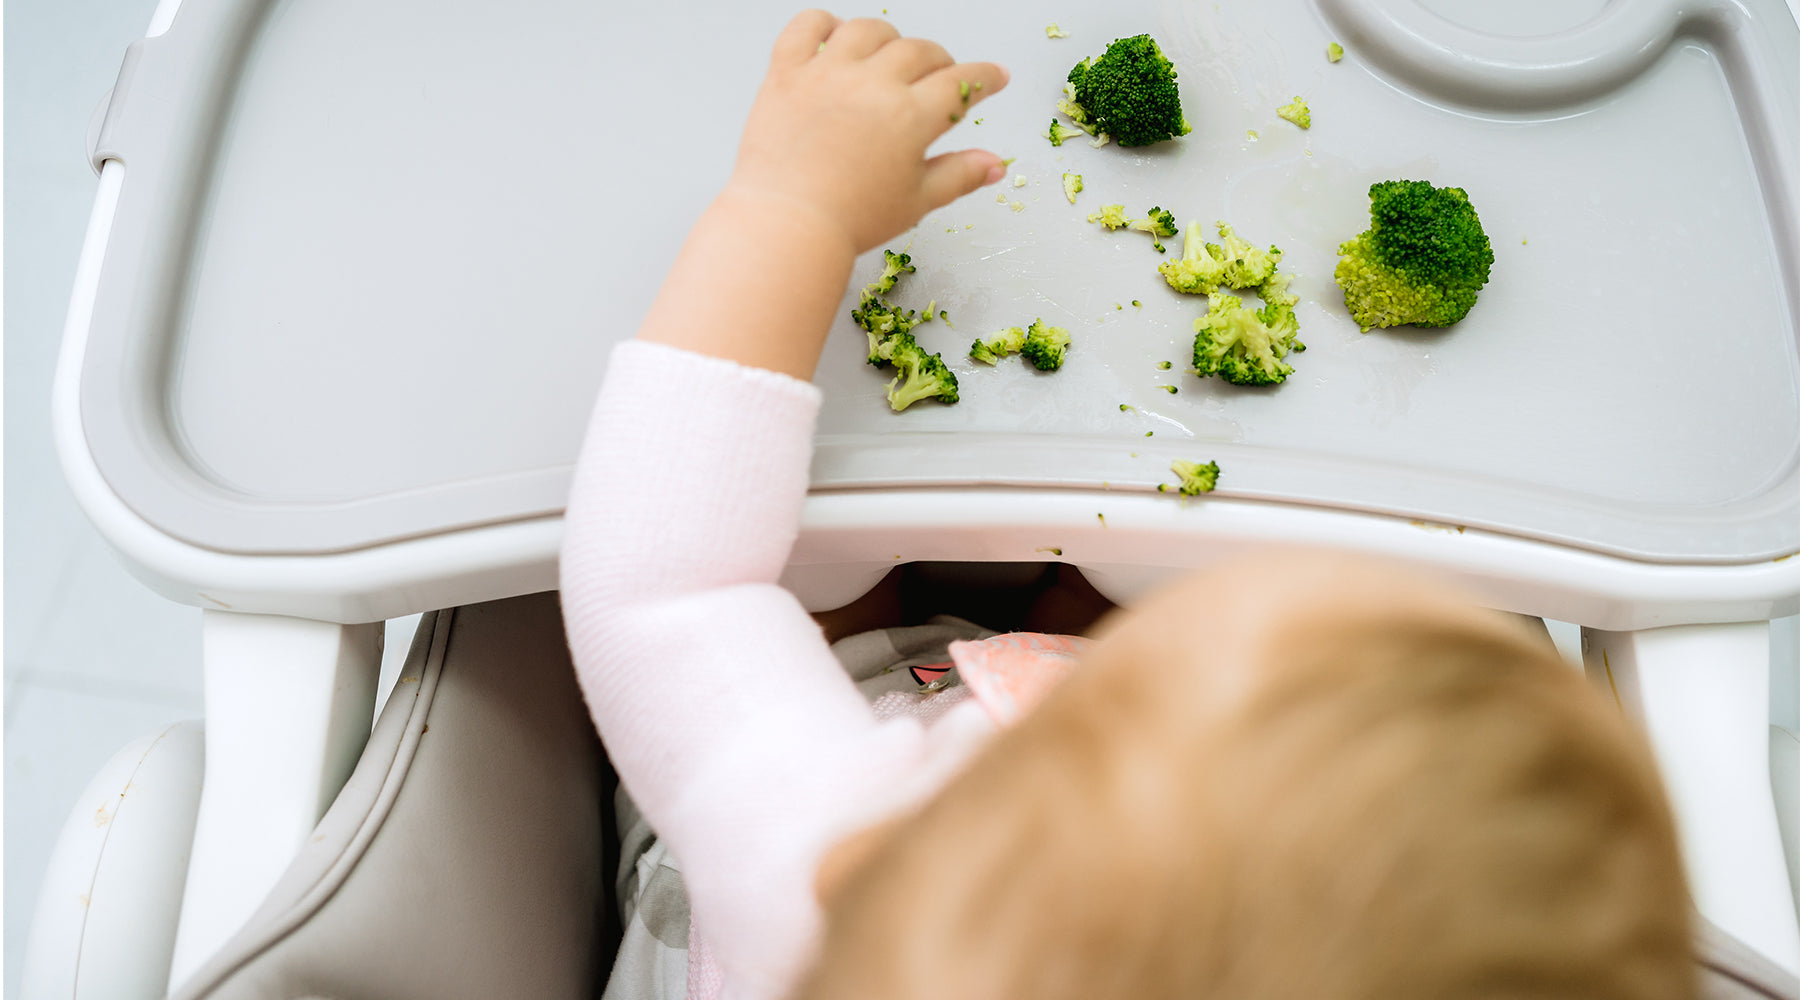 best baby snacks for 6 month olds, child eating broccoli